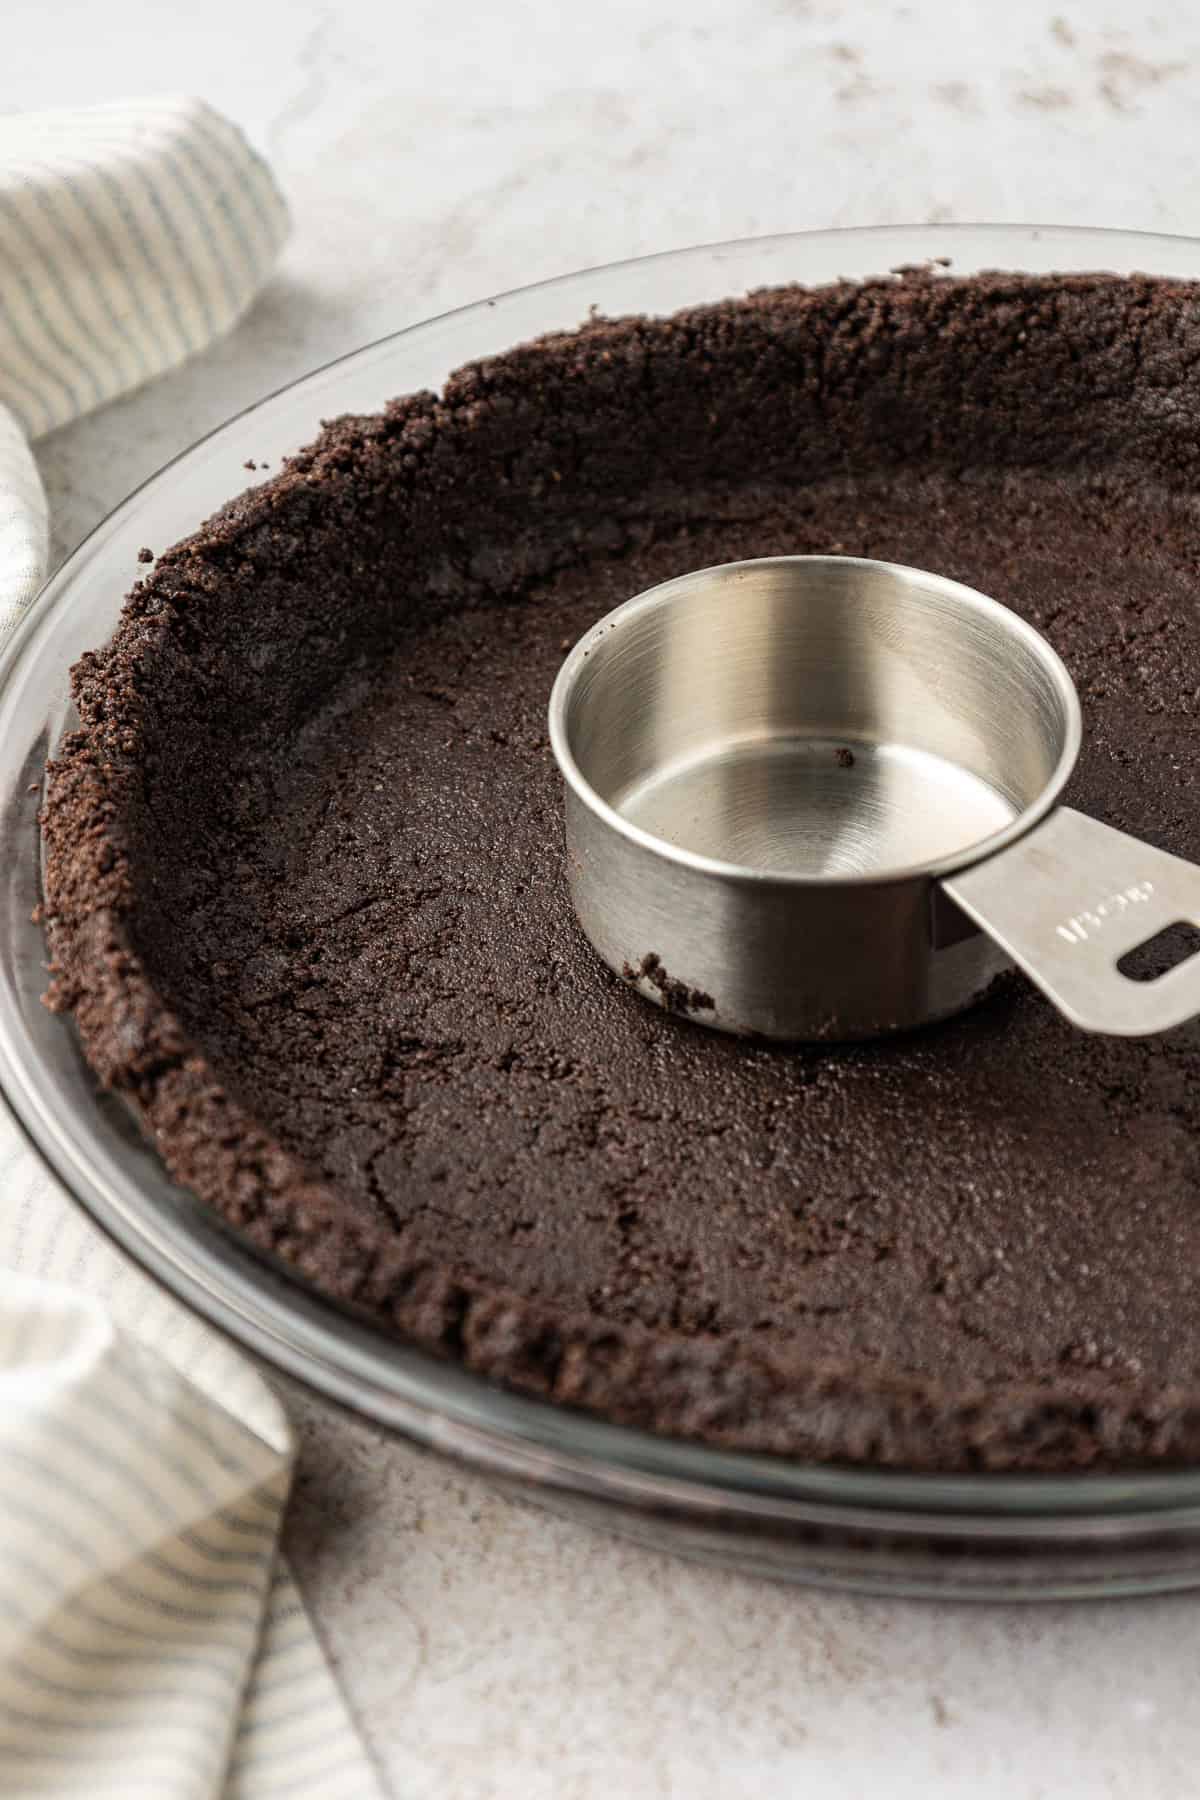 oreo crust pressed down into a class pie dish with a measuring cup